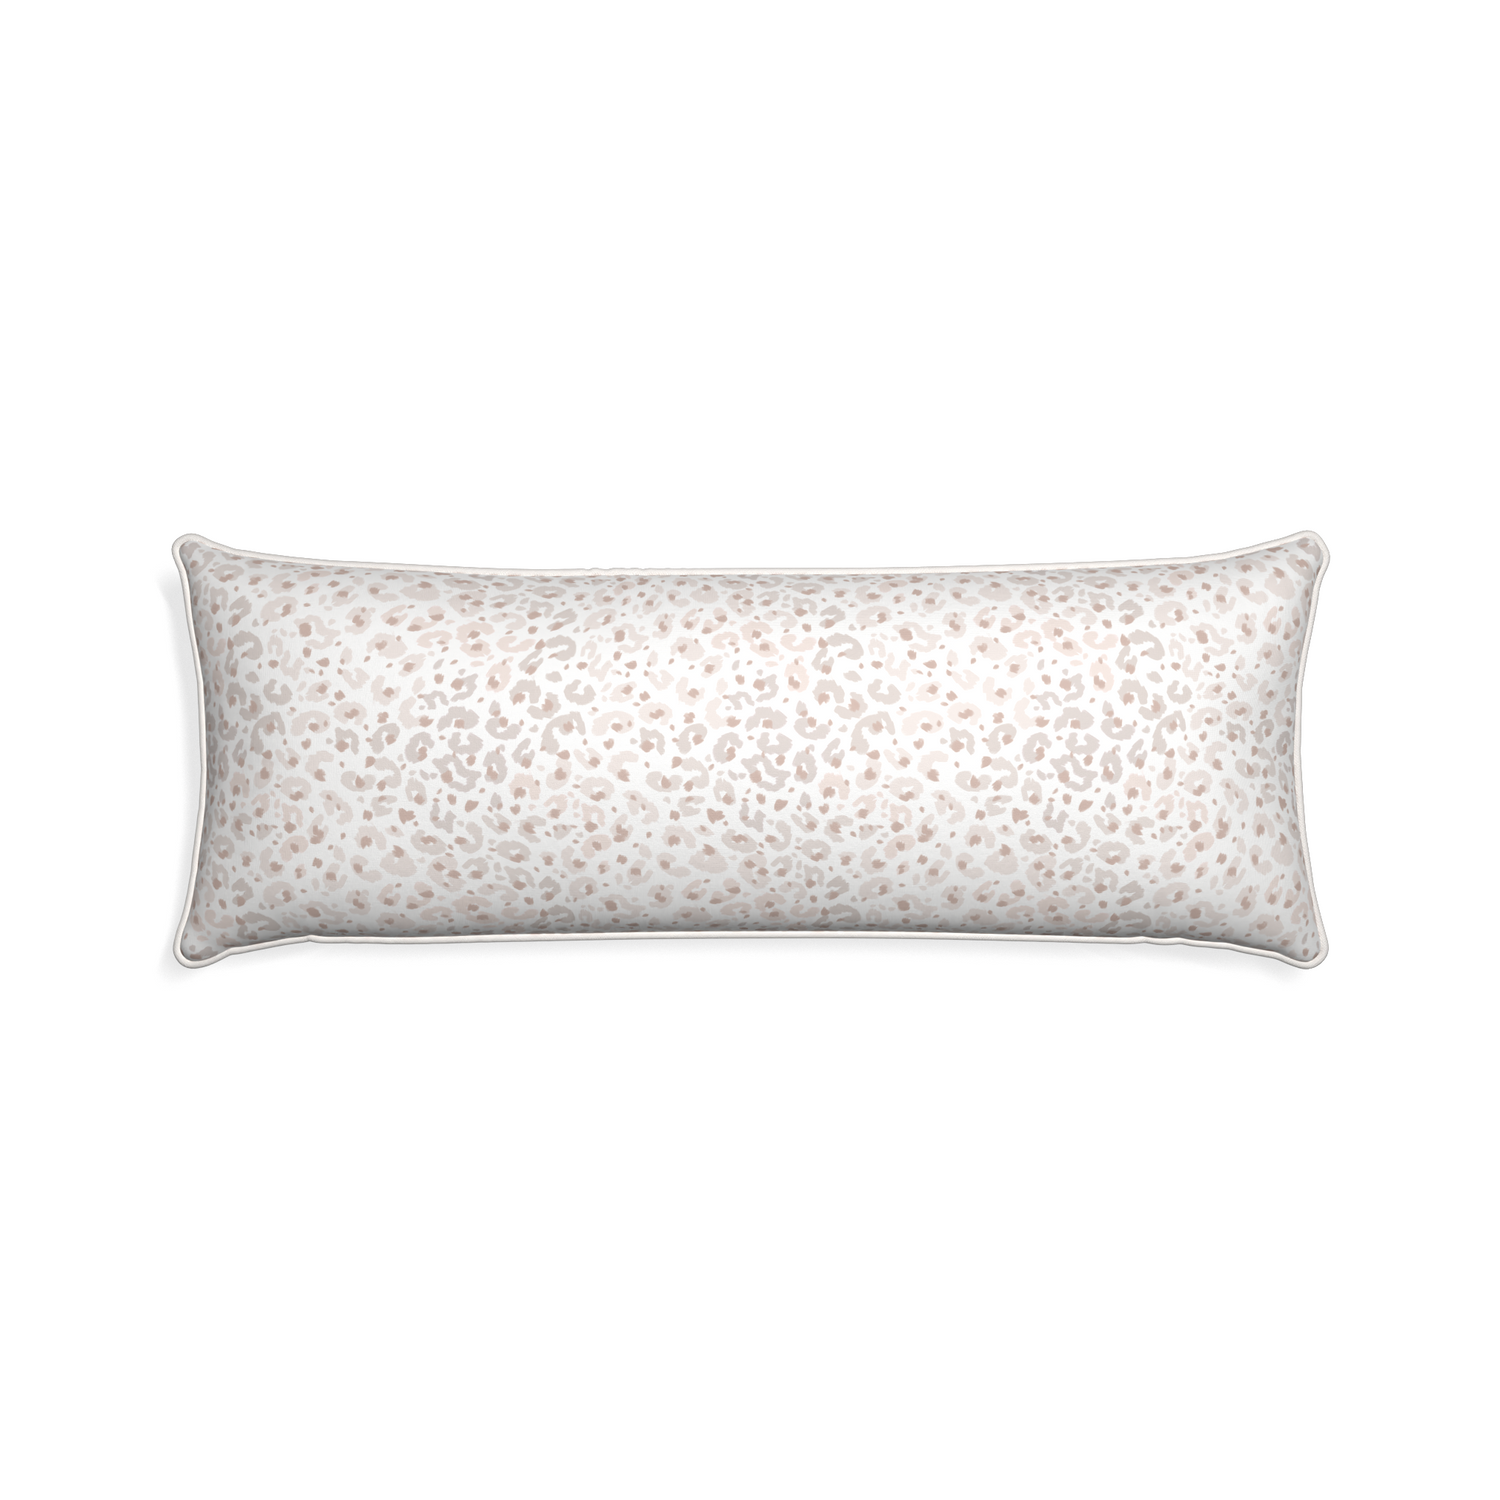 Xl-lumbar rosie custom pillow with snow piping on white background